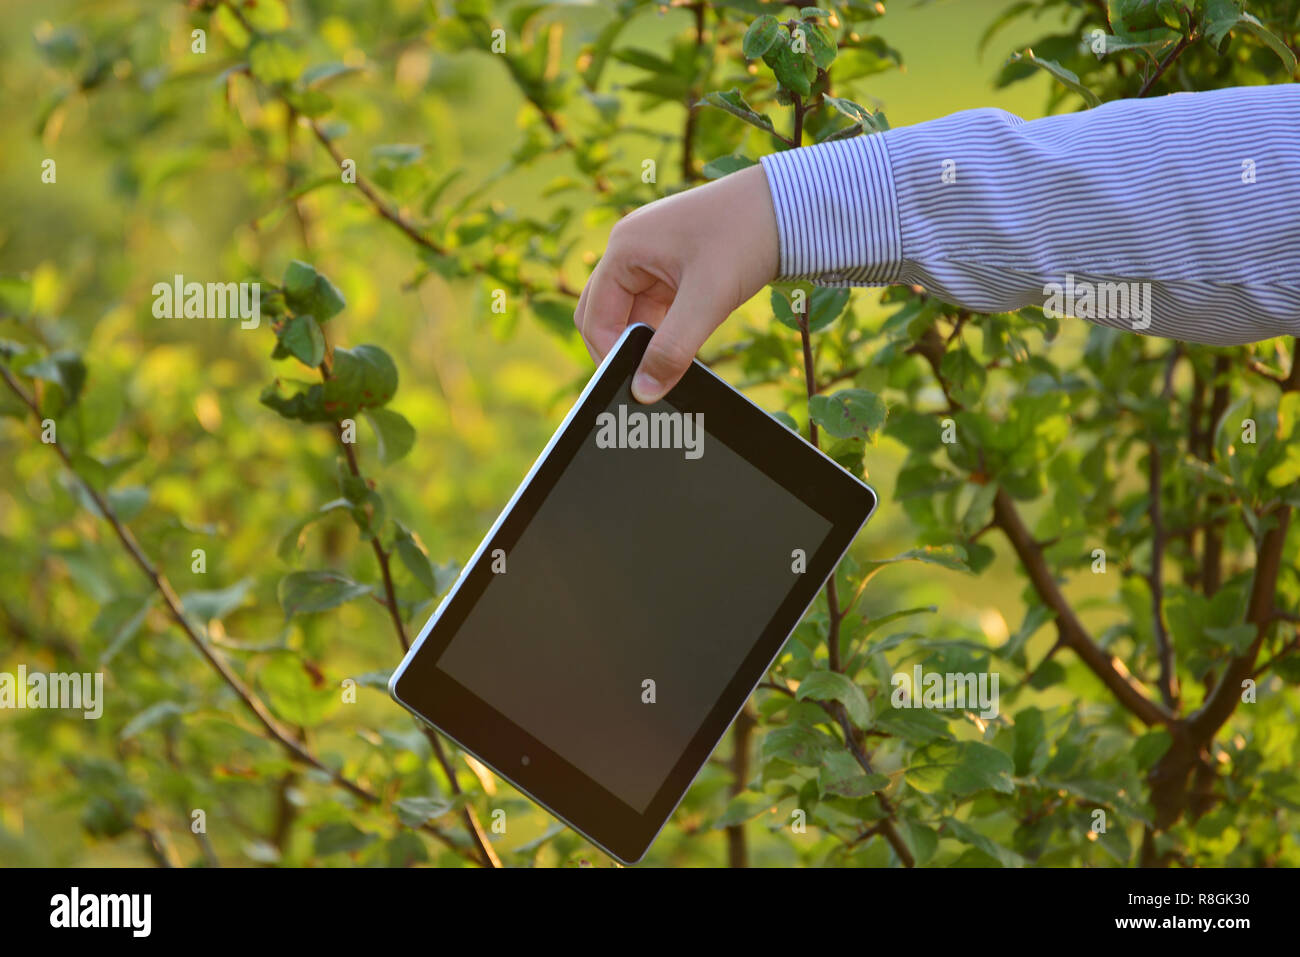 Tablet computer in  children's hand on nature Stock Photo